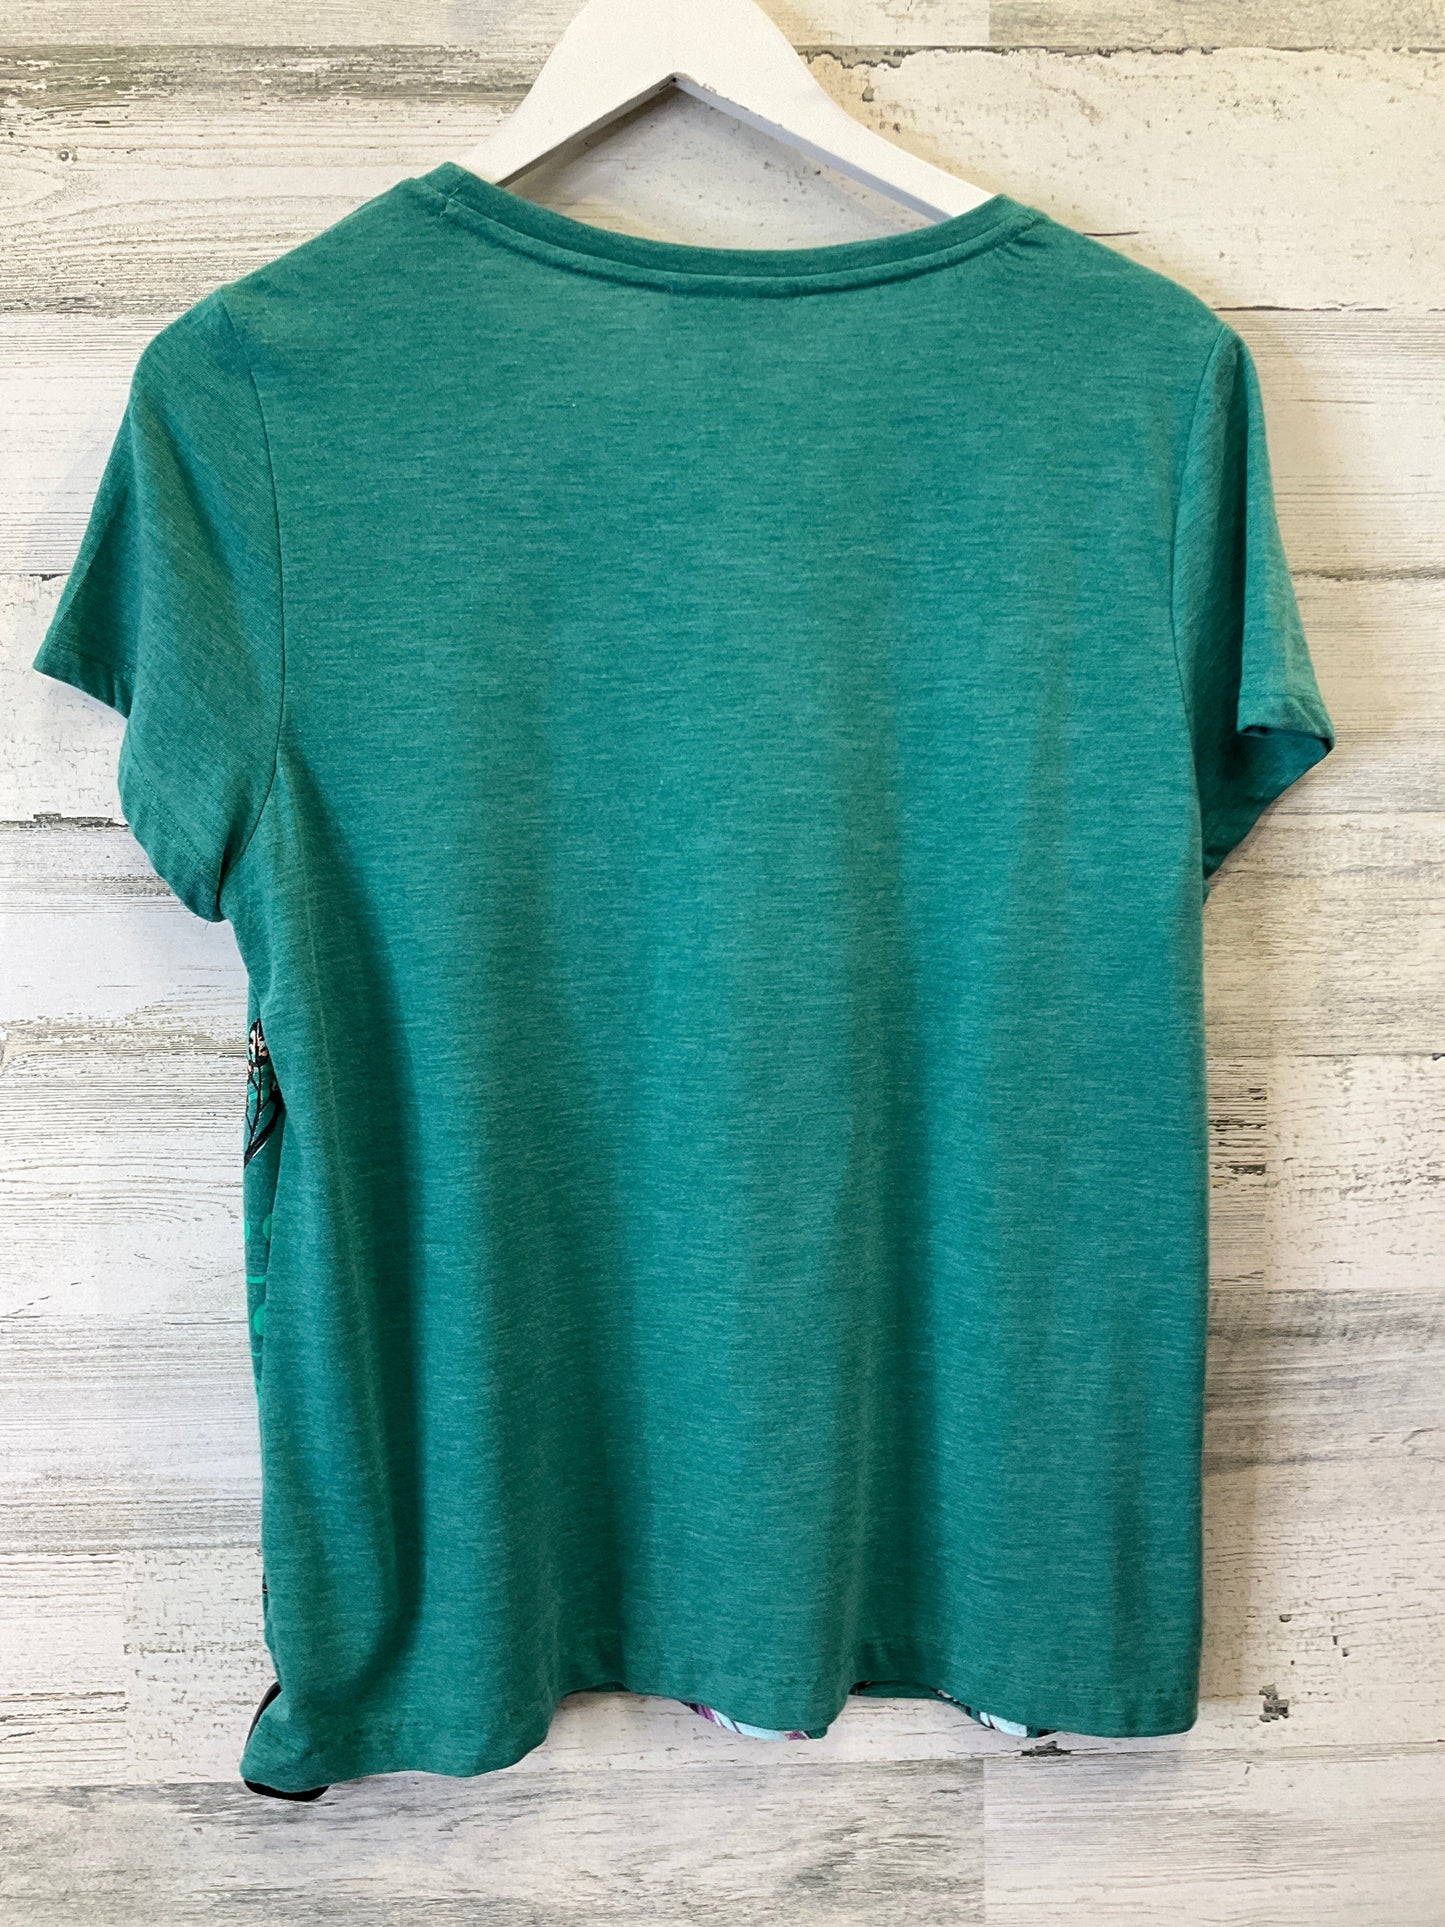 Green Top Short Sleeve Style And Company, Size M